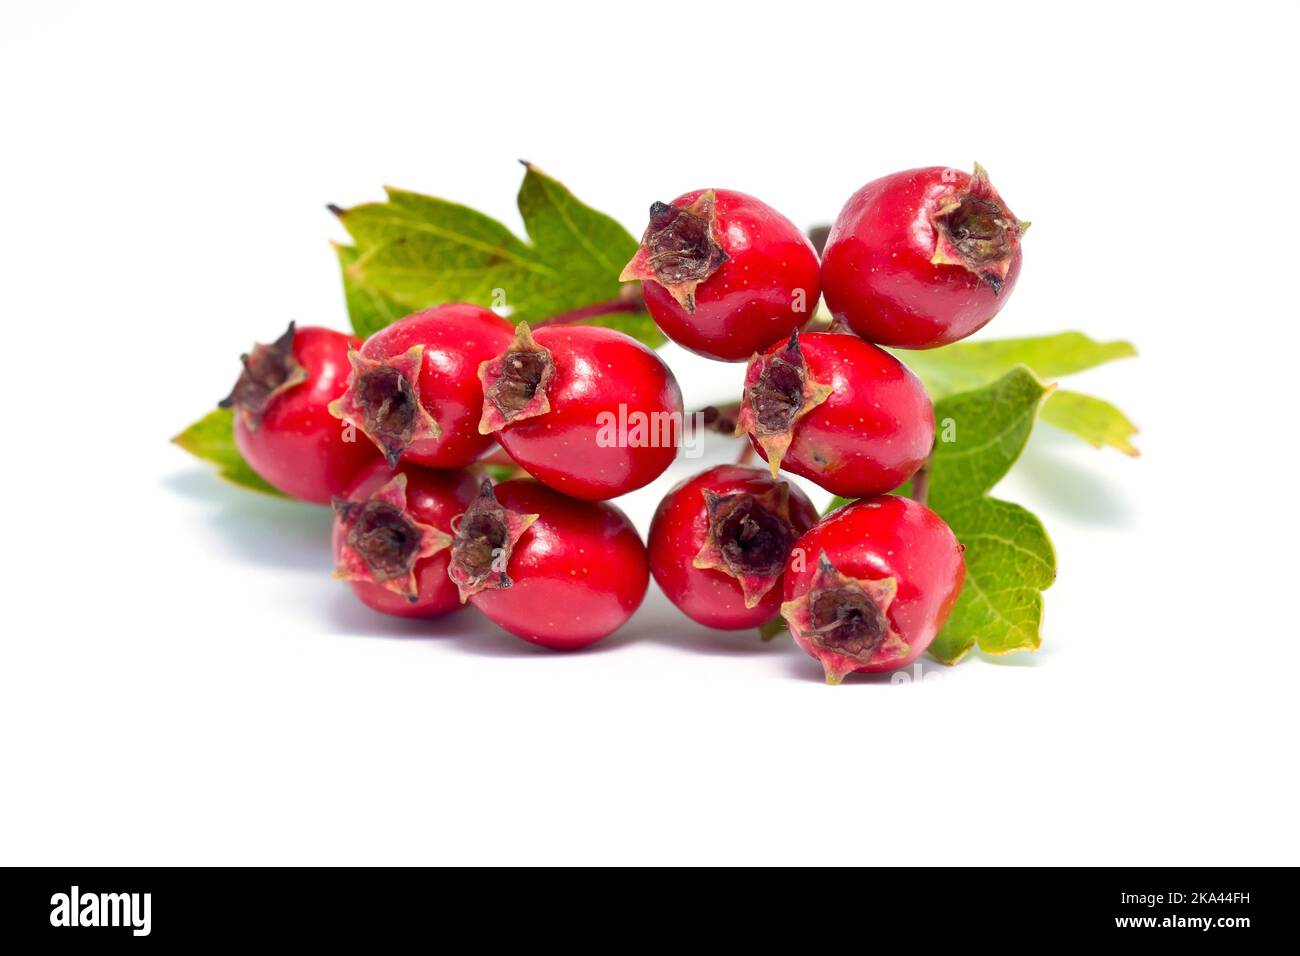 Hawthorn, Whitethorn or May Tree (crataegus monogyna), close up of the red berries or haws produced by the tree, isolated against a white background. Stock Photo